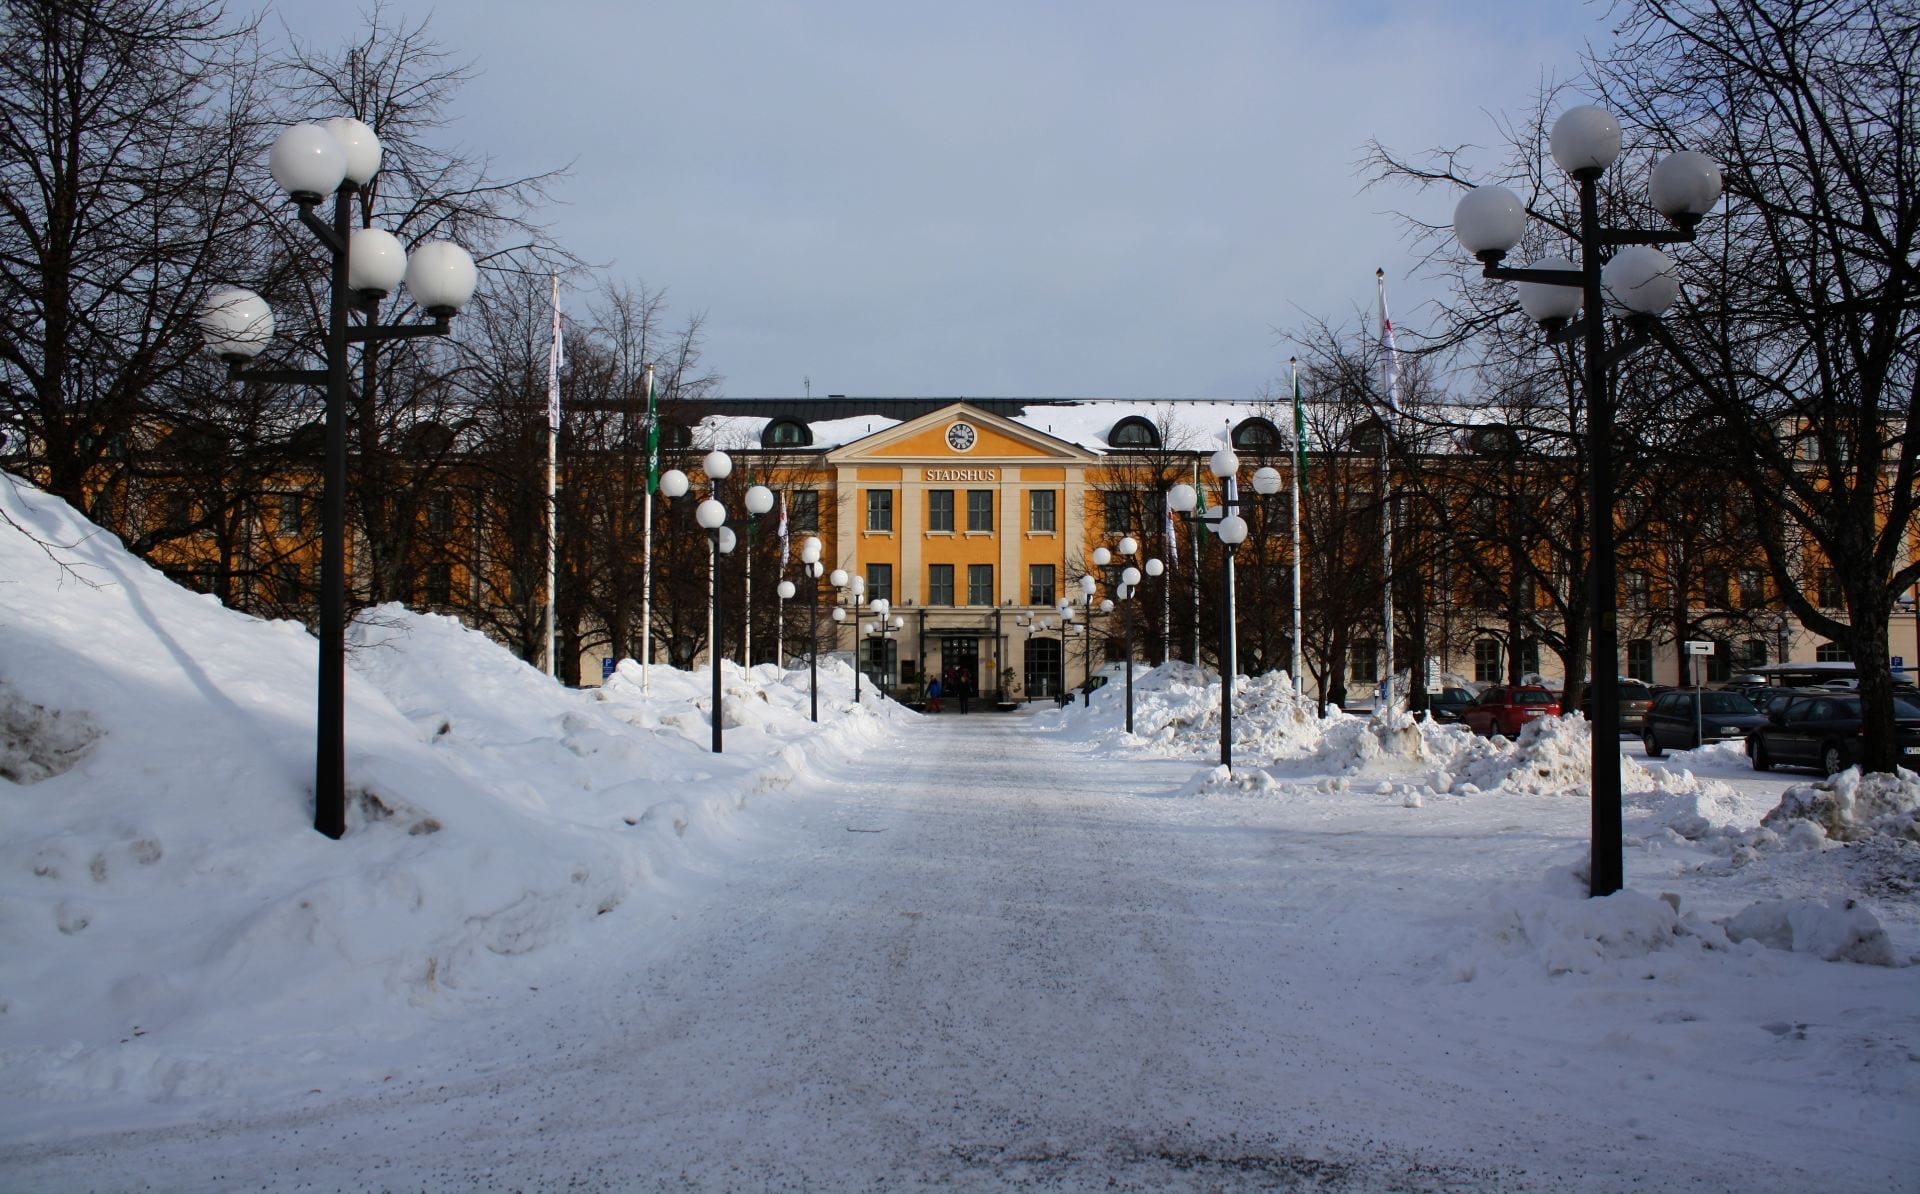 The City Hall in Umeå, Sweden in the snow.